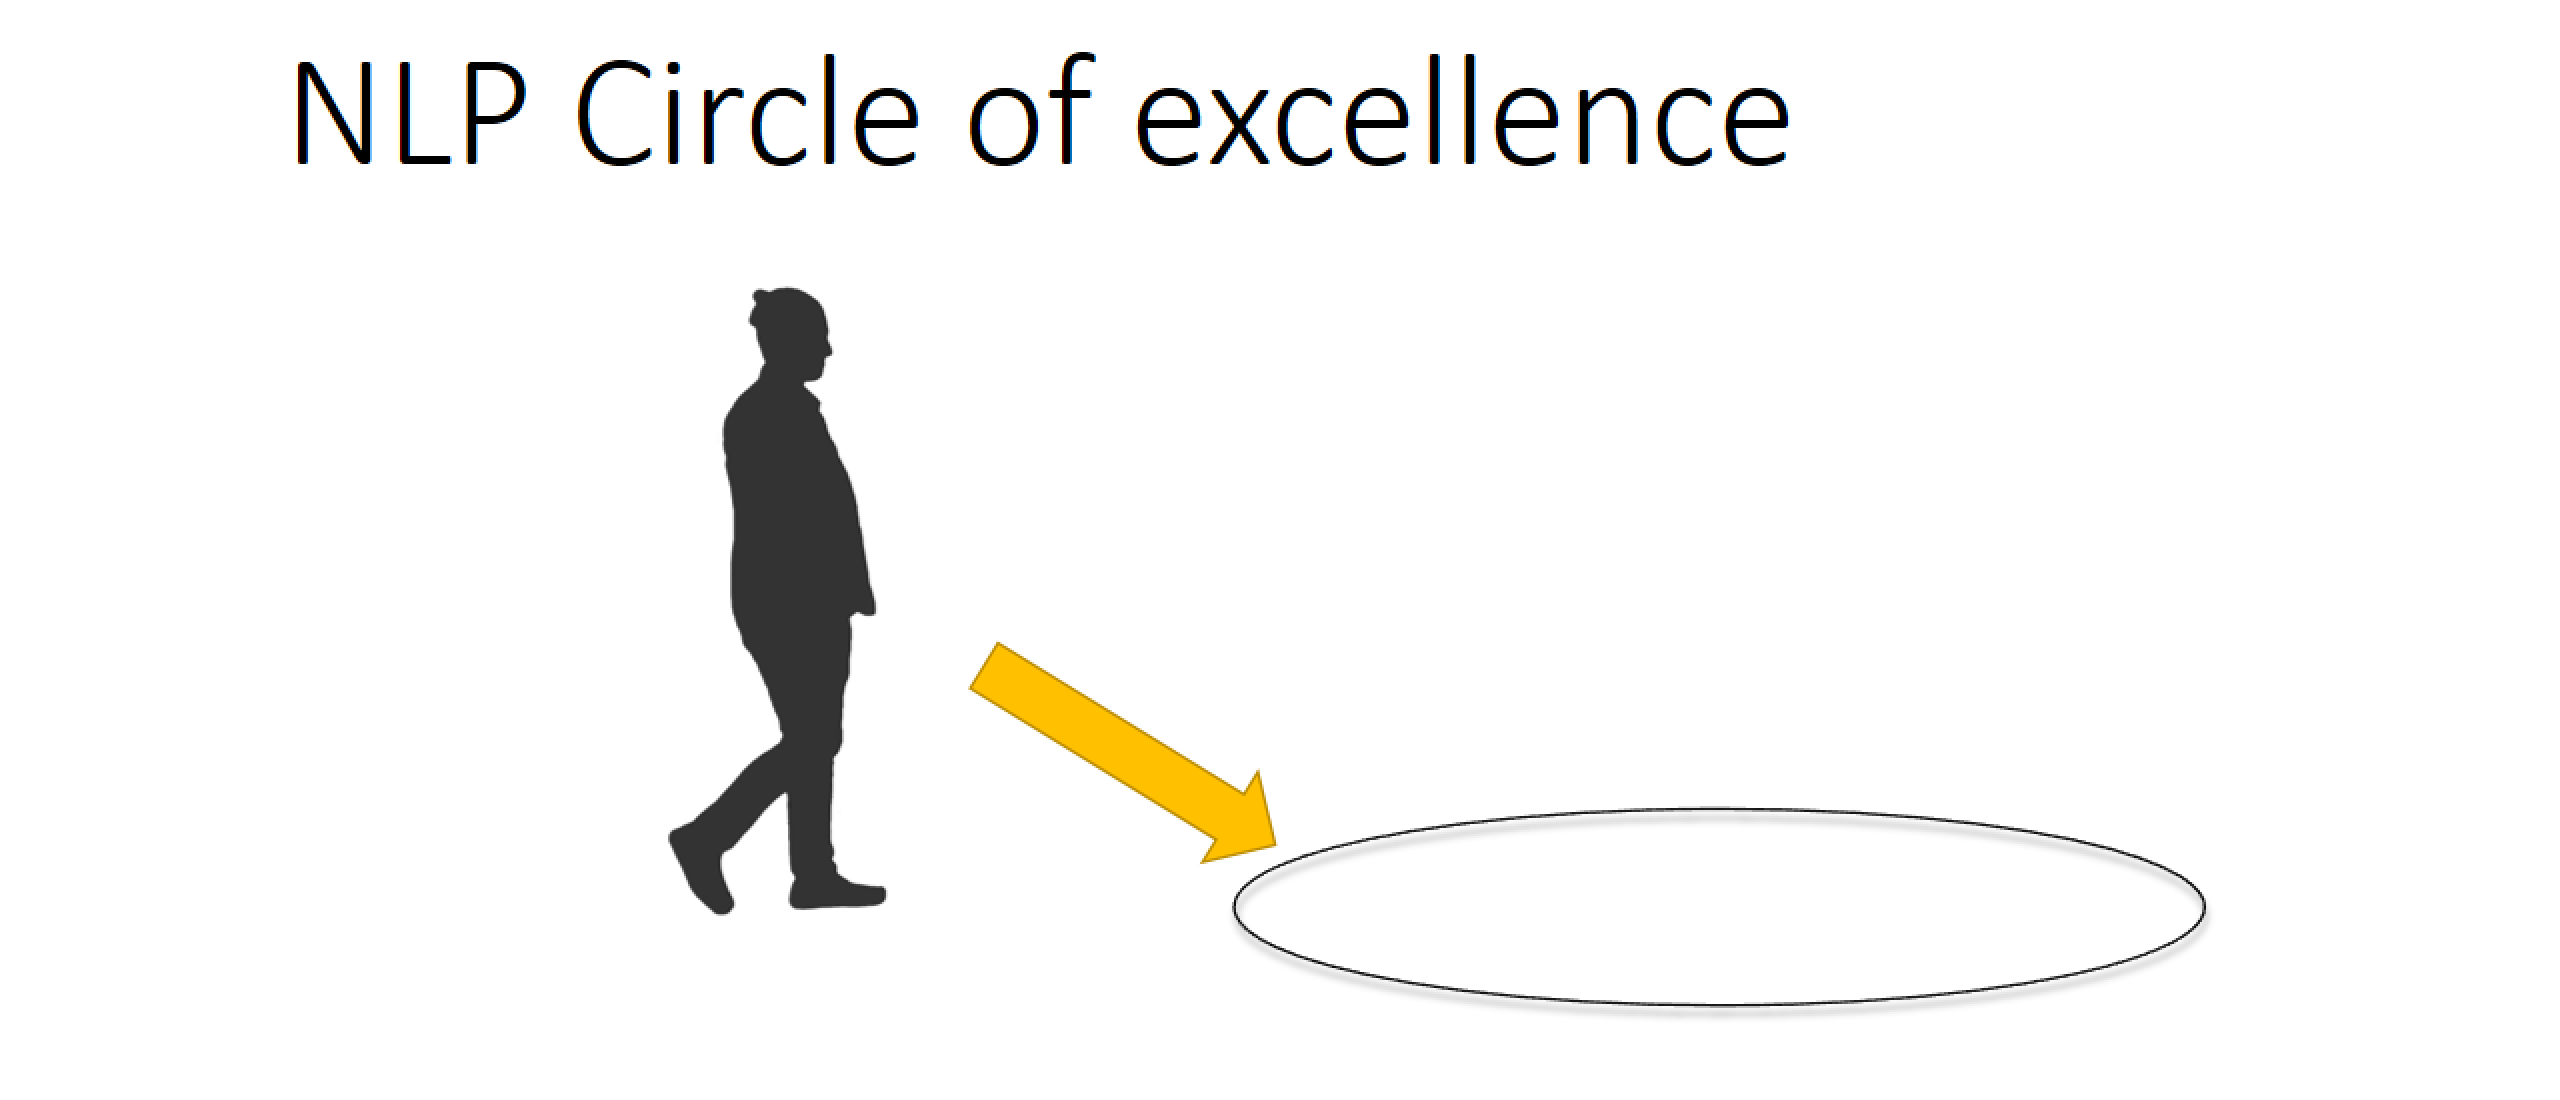 Circle of excellence